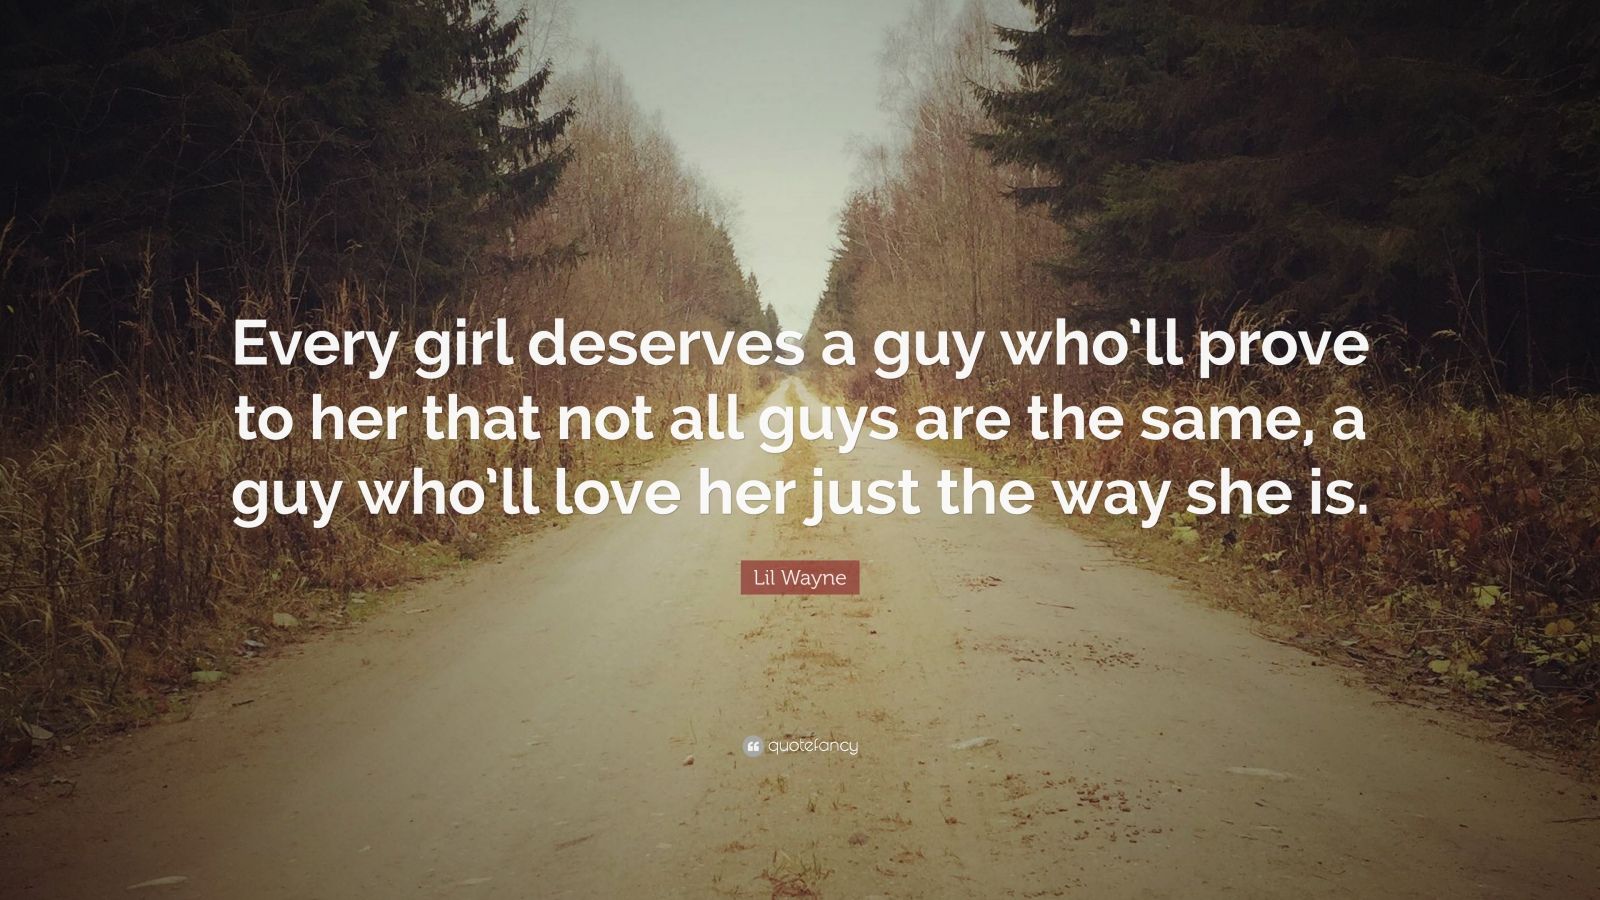 Lil Wayne Quote: “Every girl deserves a guy who'll prove to ...